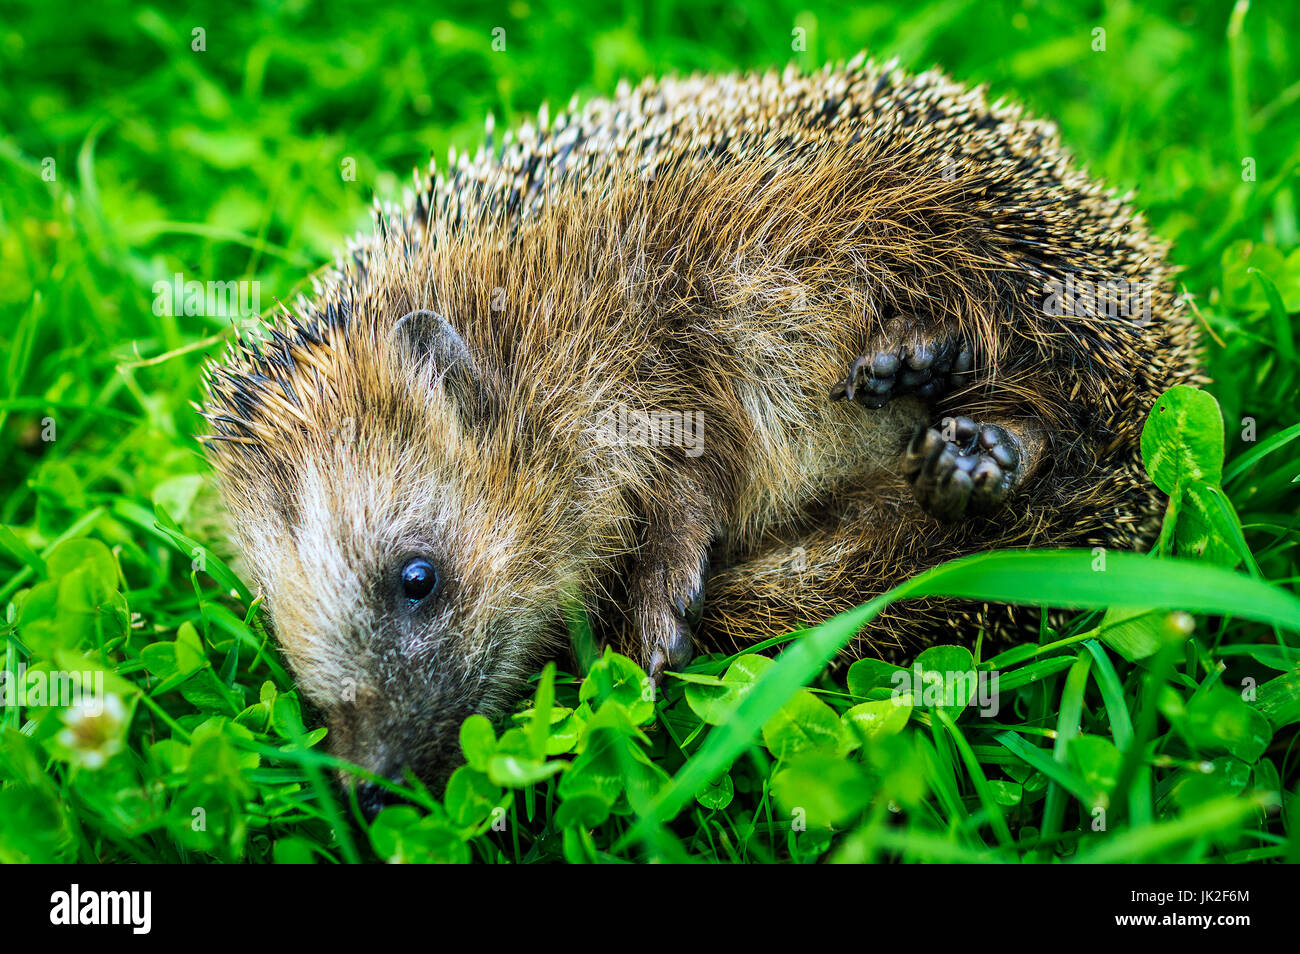 Little hedgehog in the grass. Stock Photo